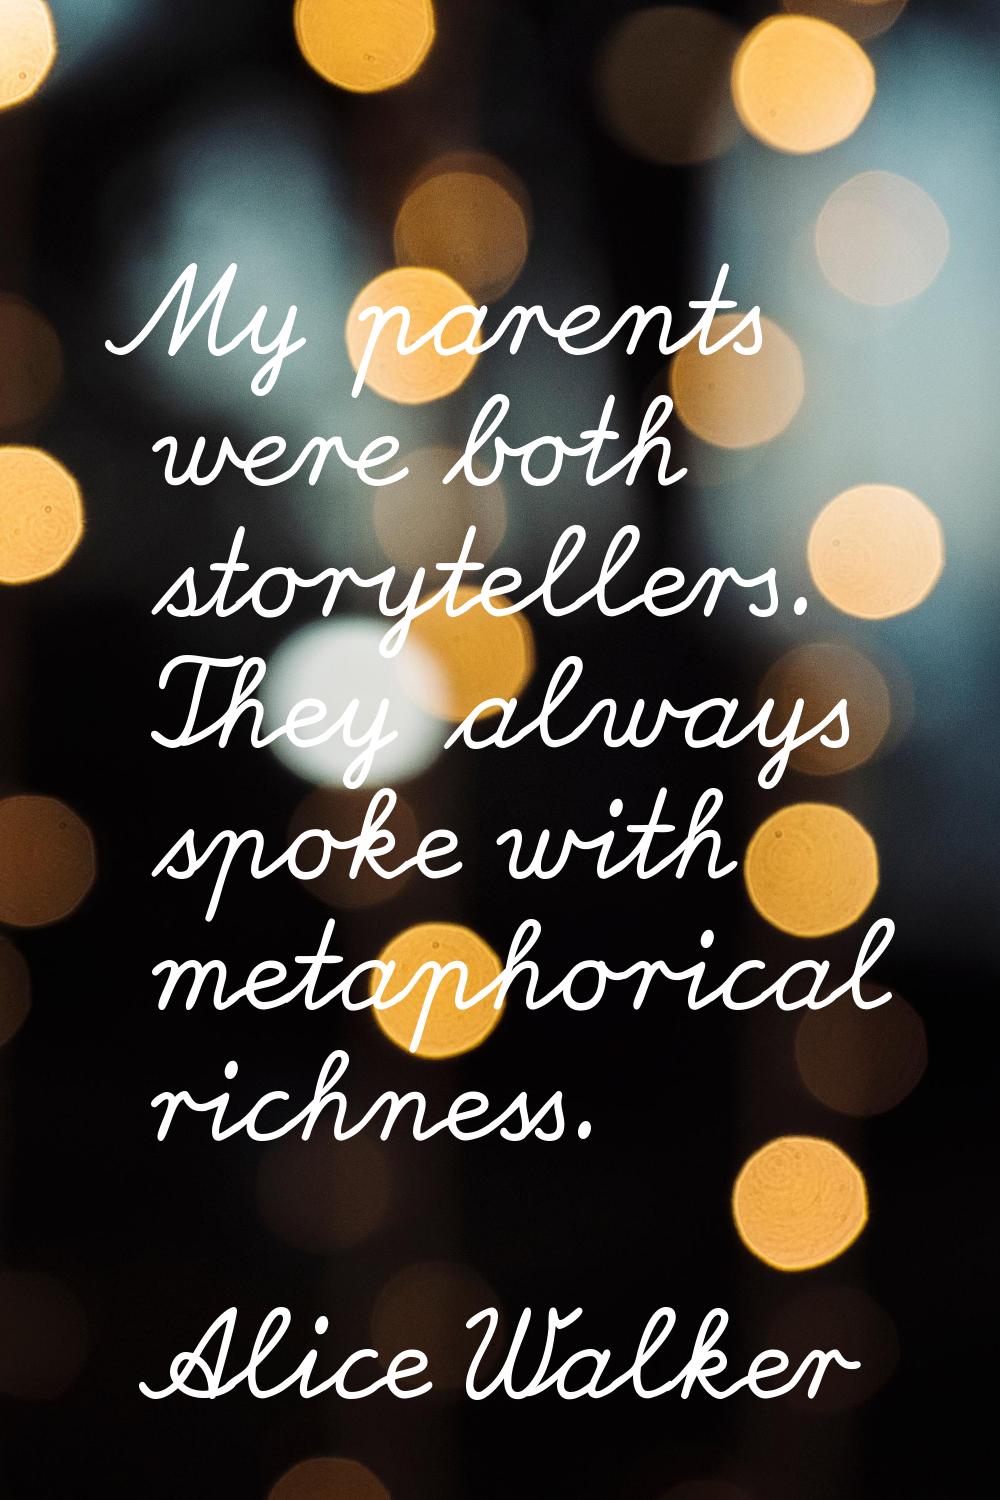 My parents were both storytellers. They always spoke with metaphorical richness.